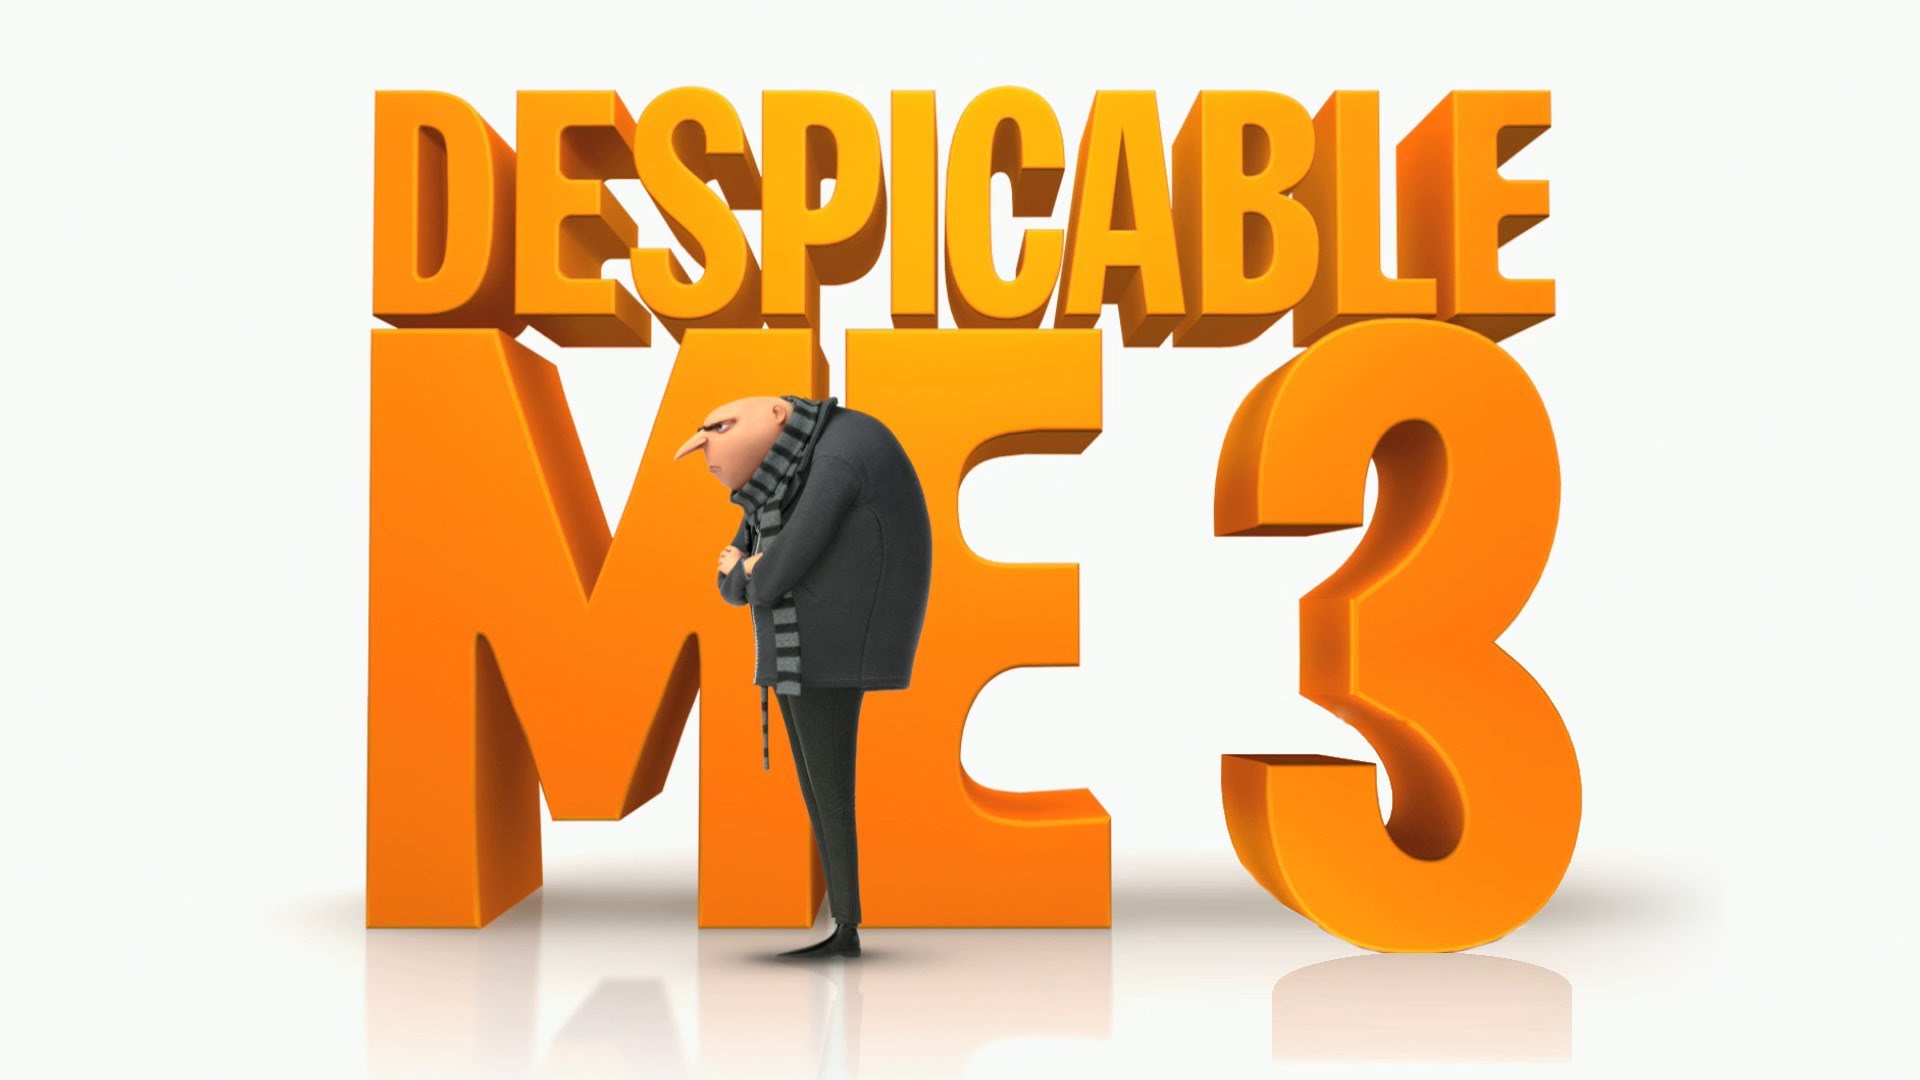 Despicable Me 3 Movies Images Photos Pictures Backgrounds